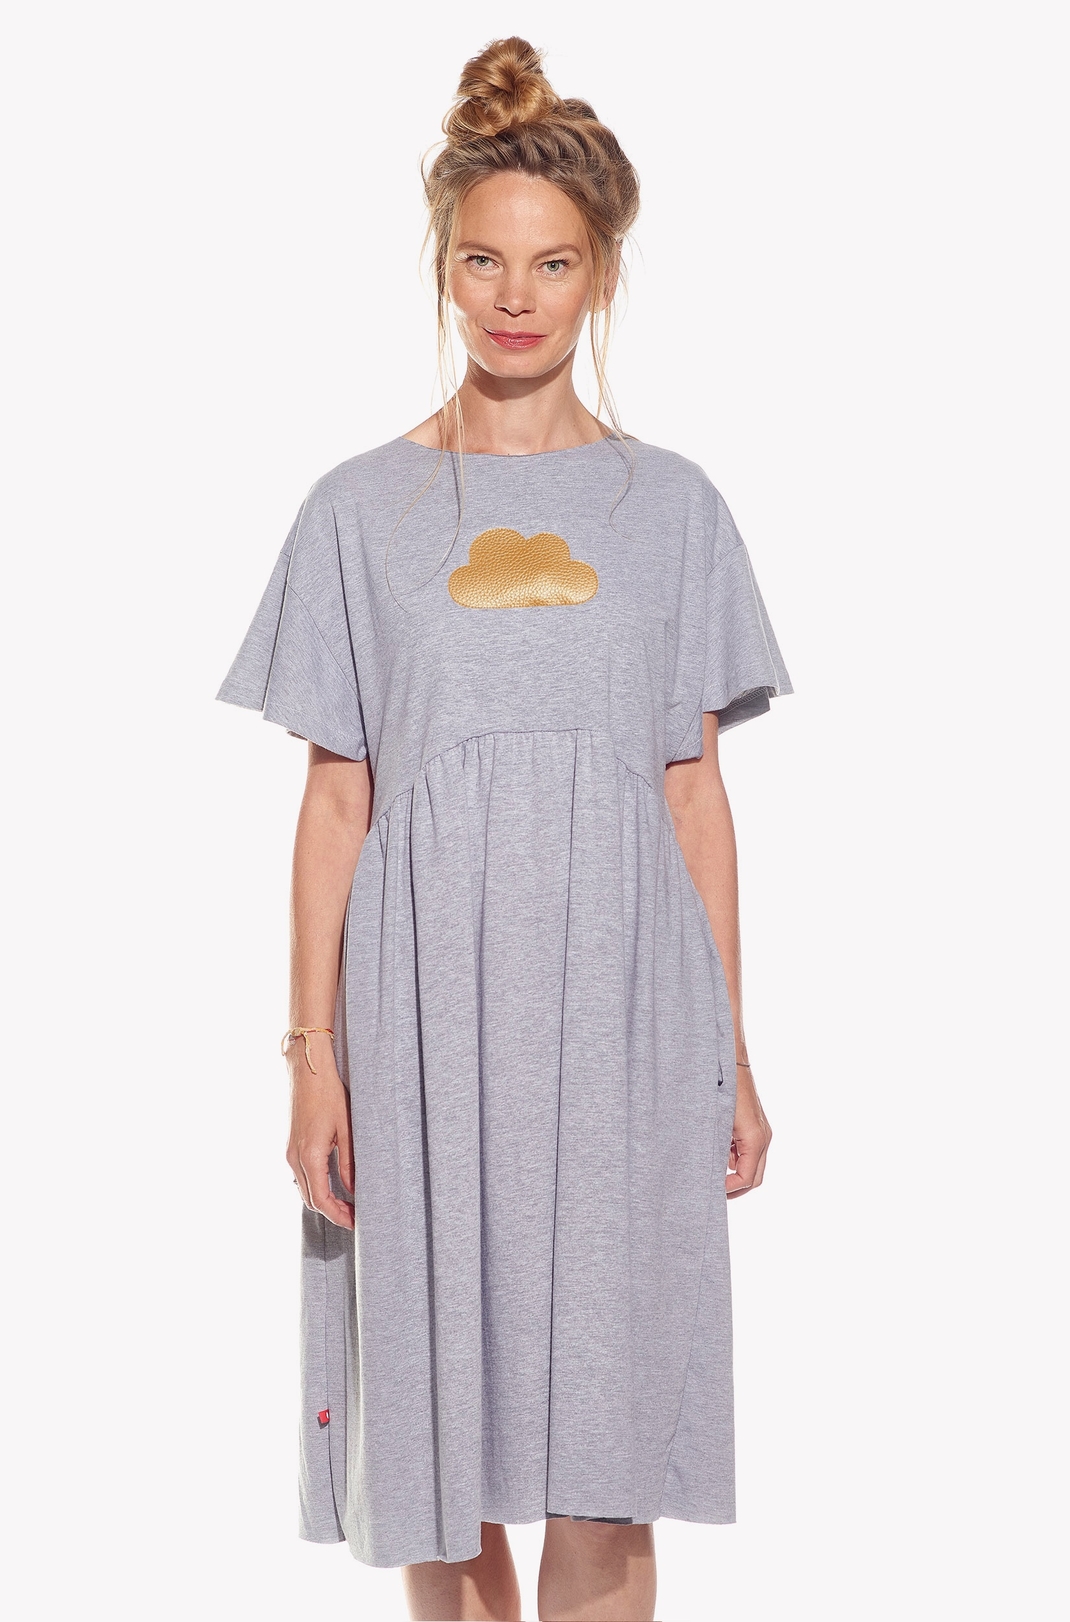 Dresses with cloud